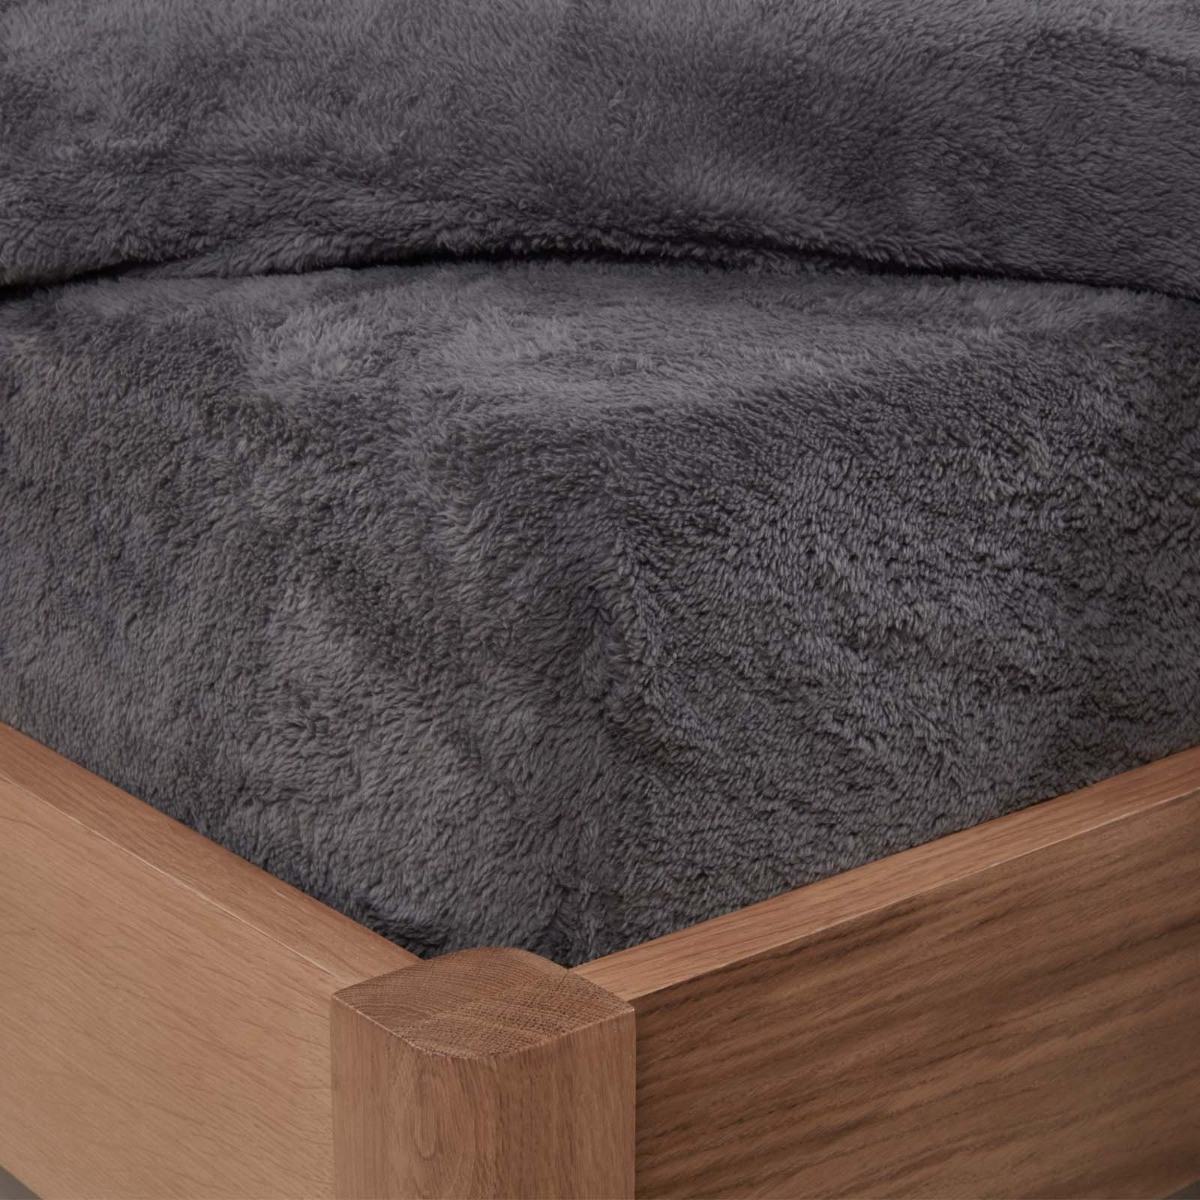 Brentfords Teddy Fleece Fitted Sheet, Charcoal Grey - Double>